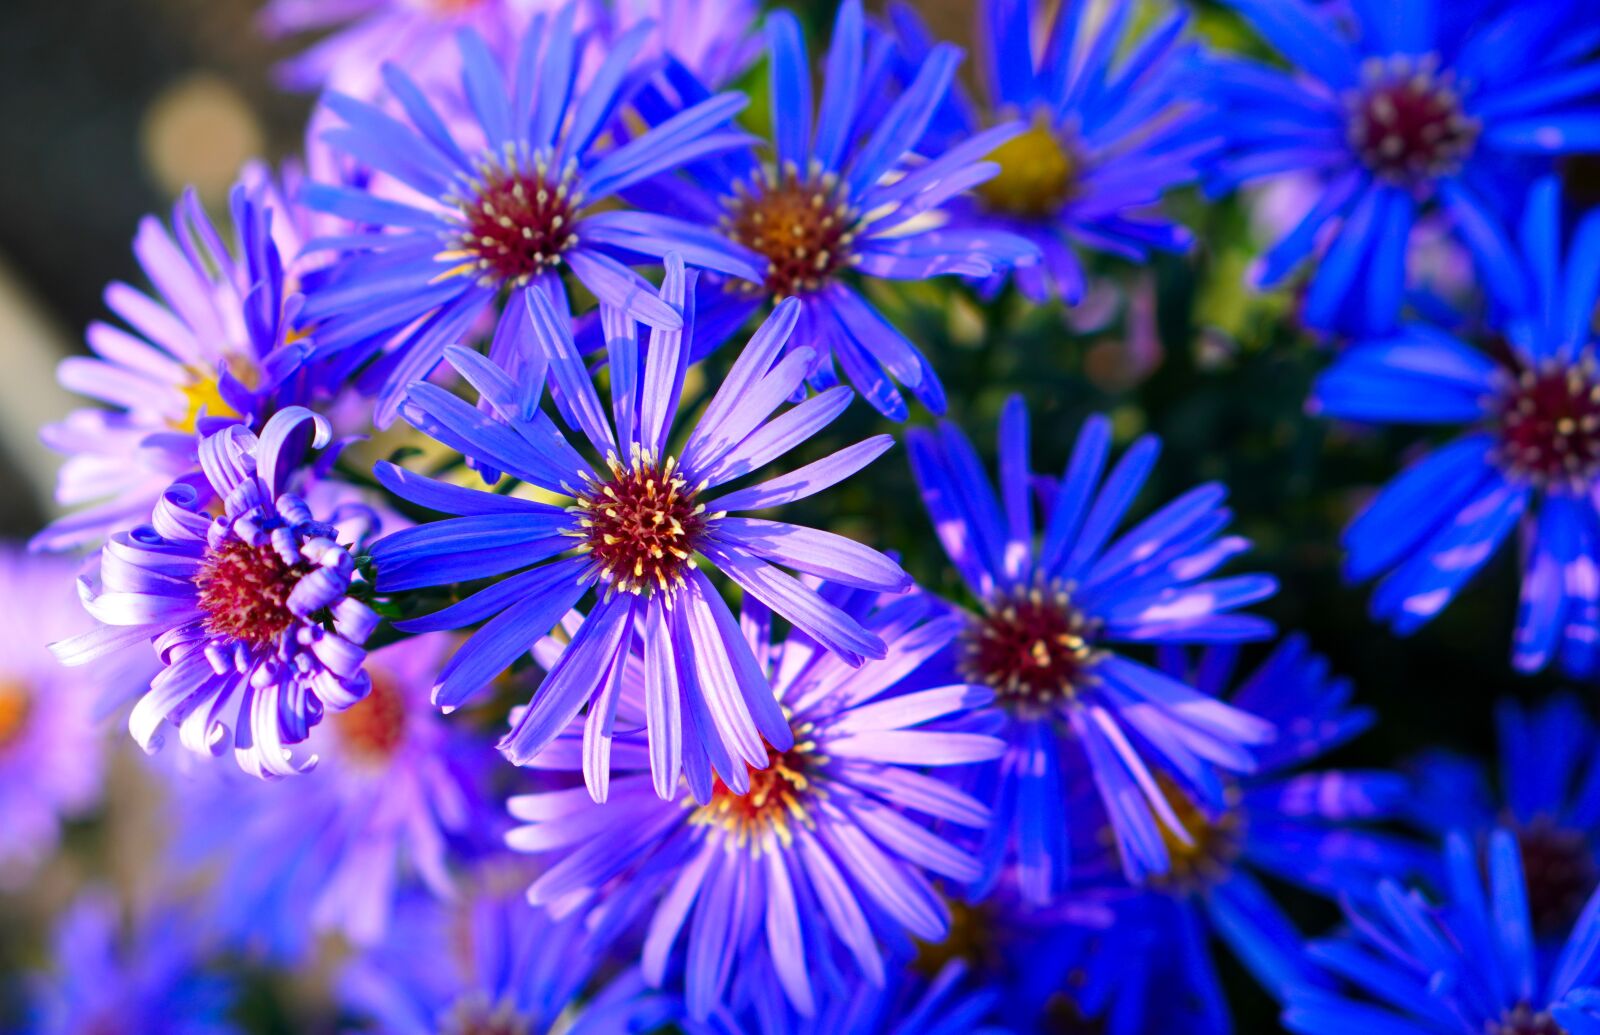 Sony a6400 sample photo. Flowers, asters, garden photography